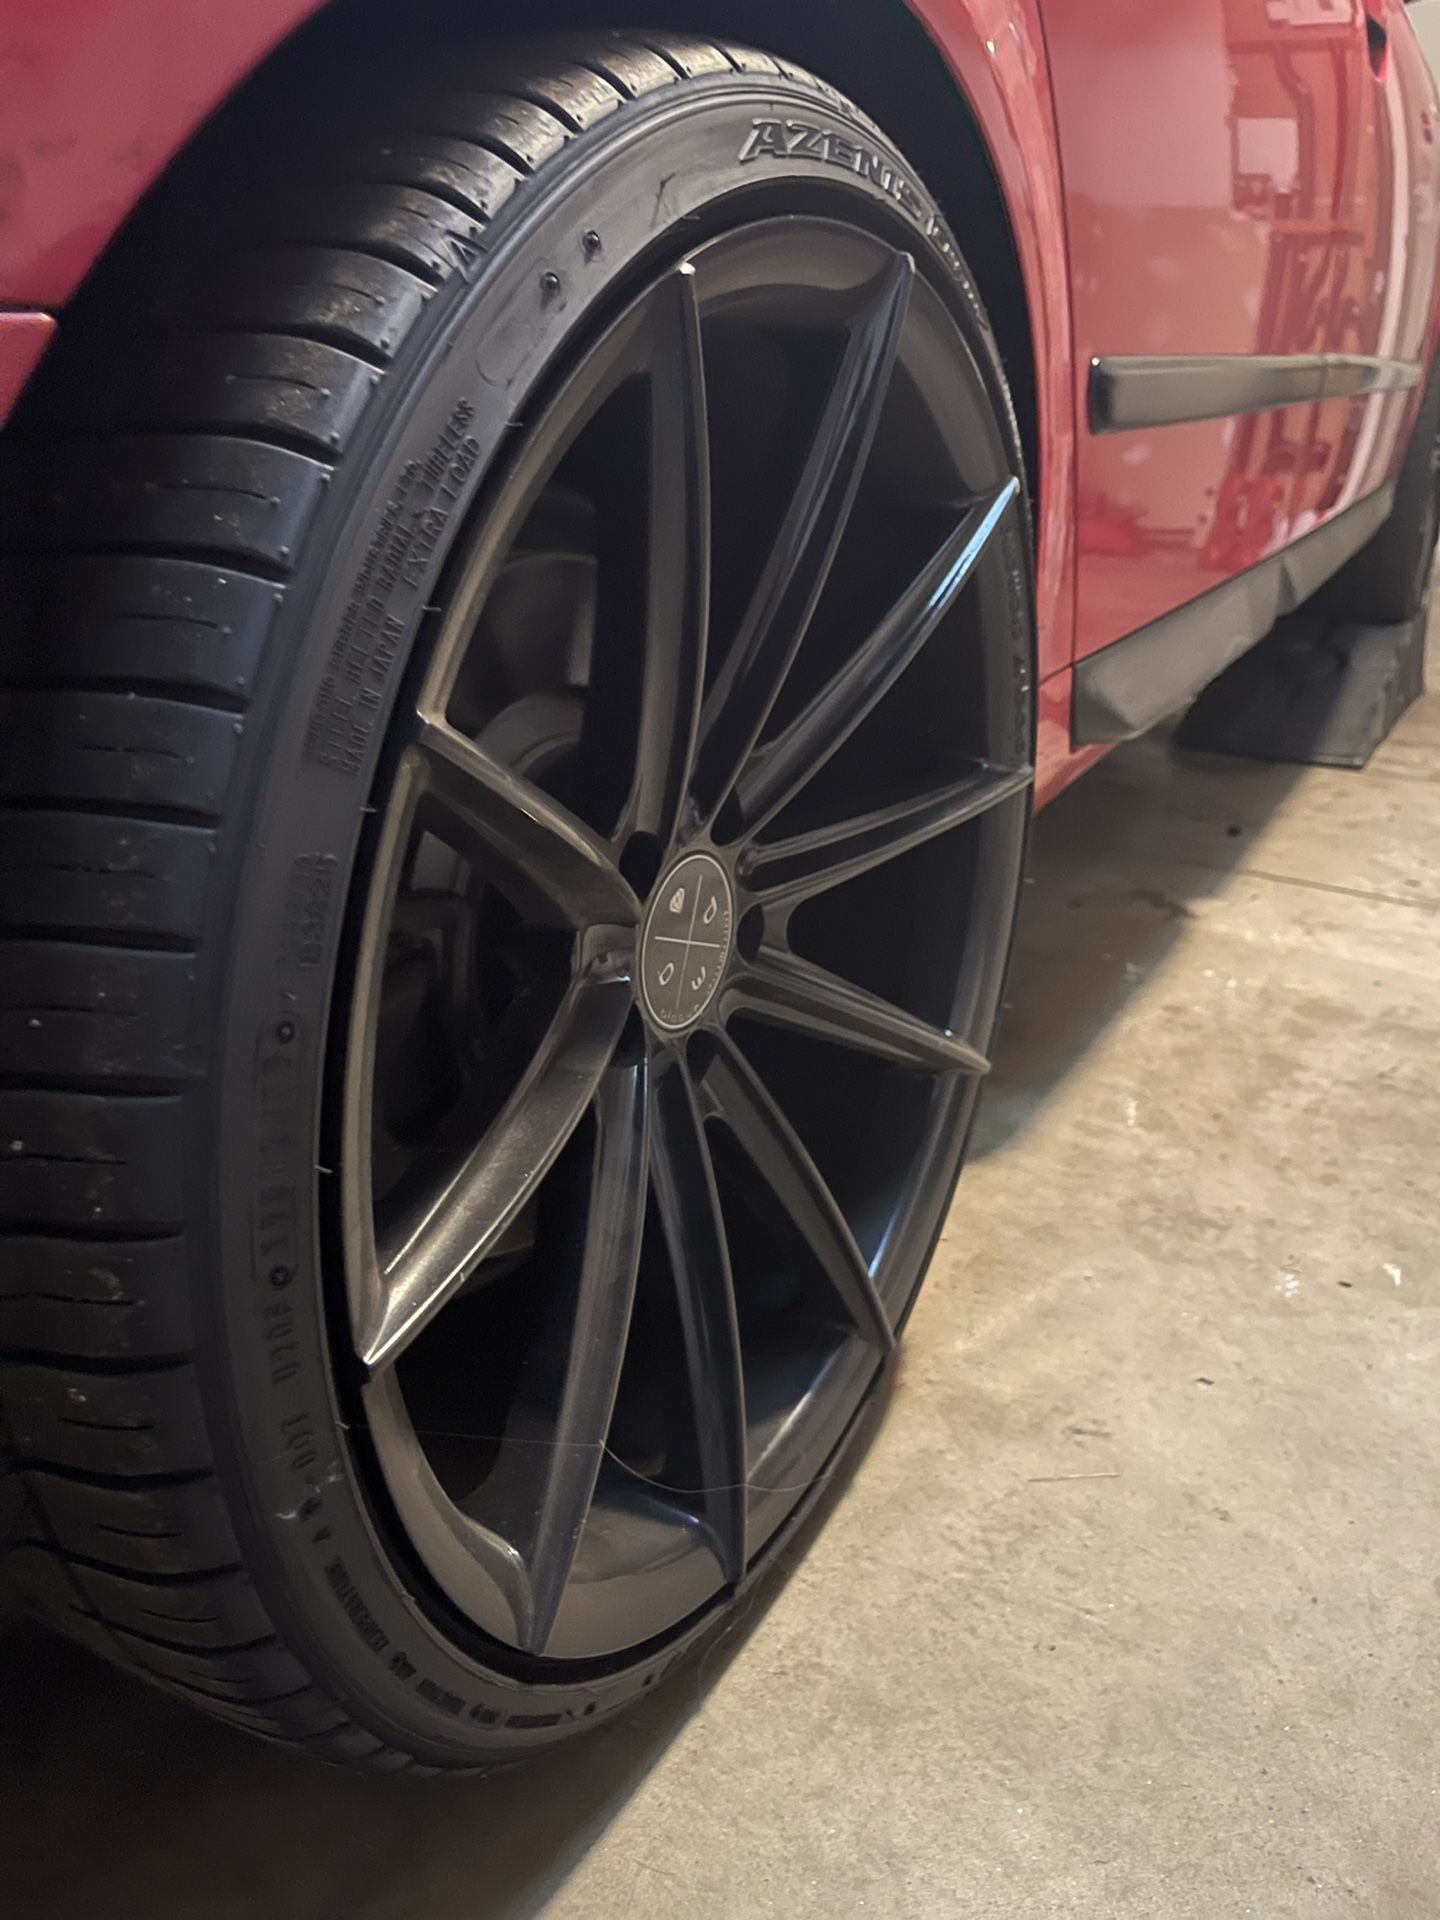 Asombro capa ética 255 30 19 rear tires 235 35 19 front tires for Sale in Anaheim, CA - OfferUp